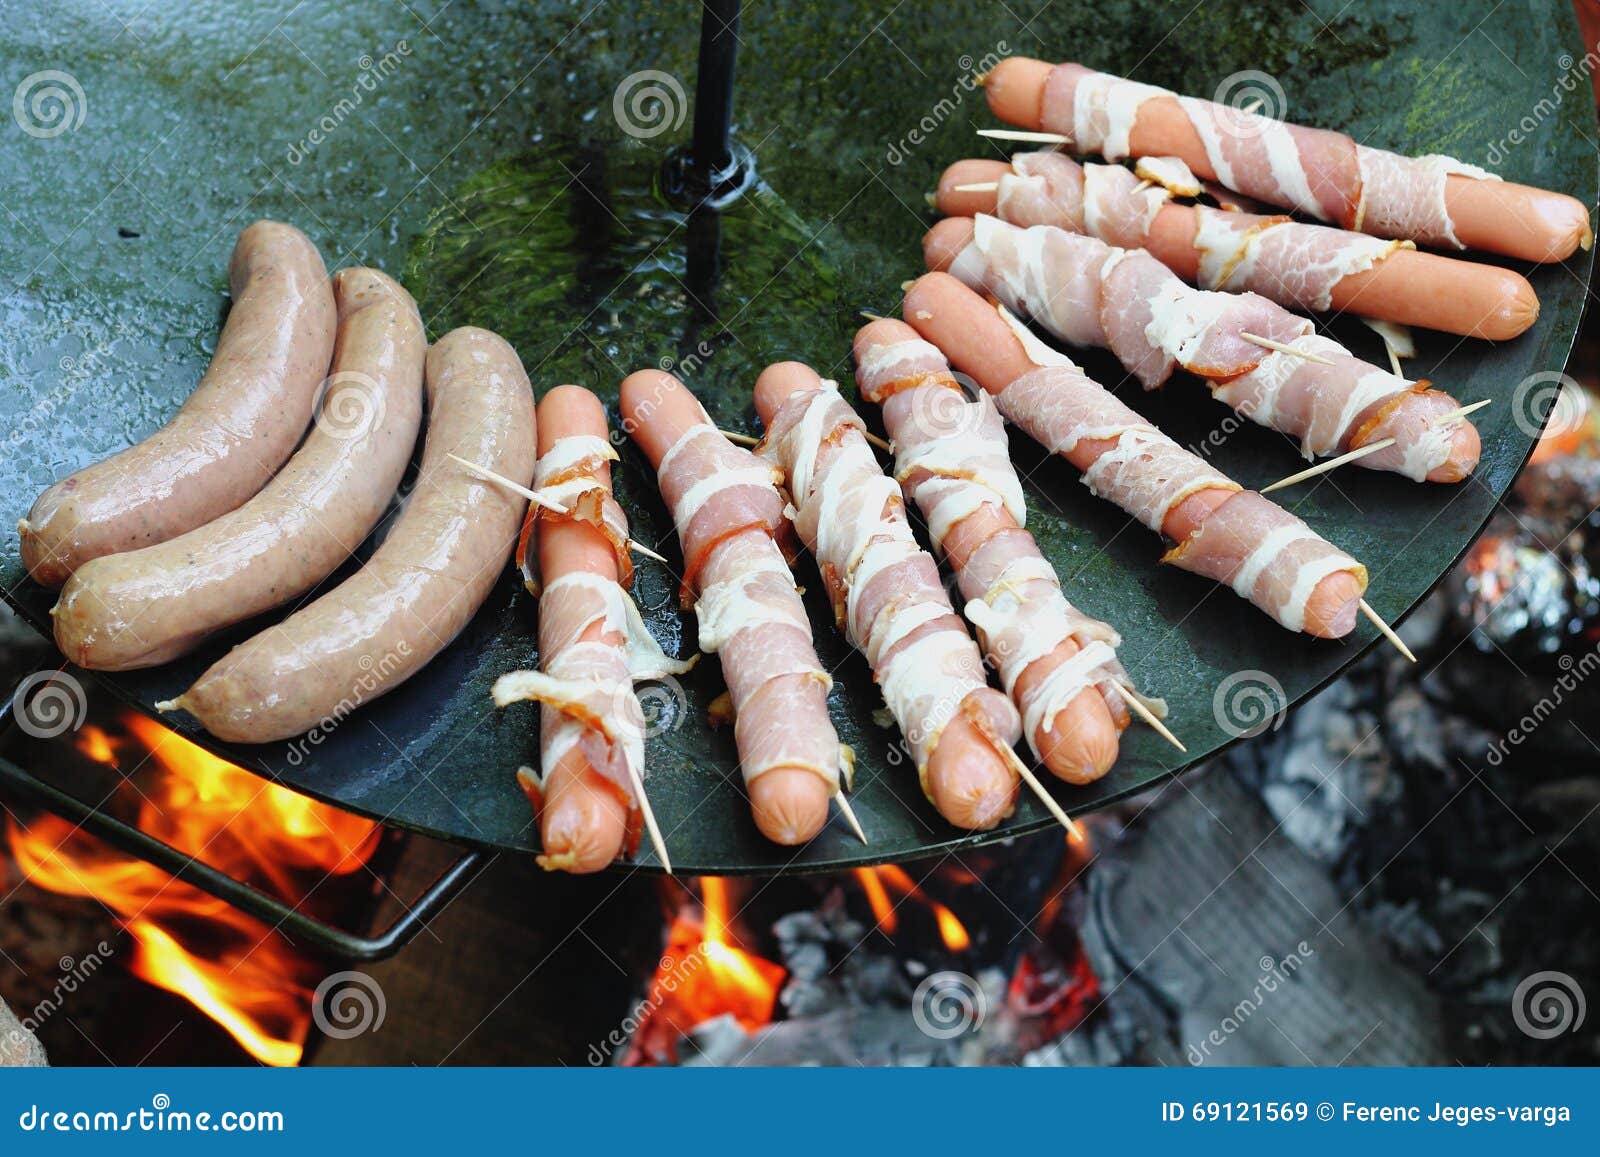 baked sausages